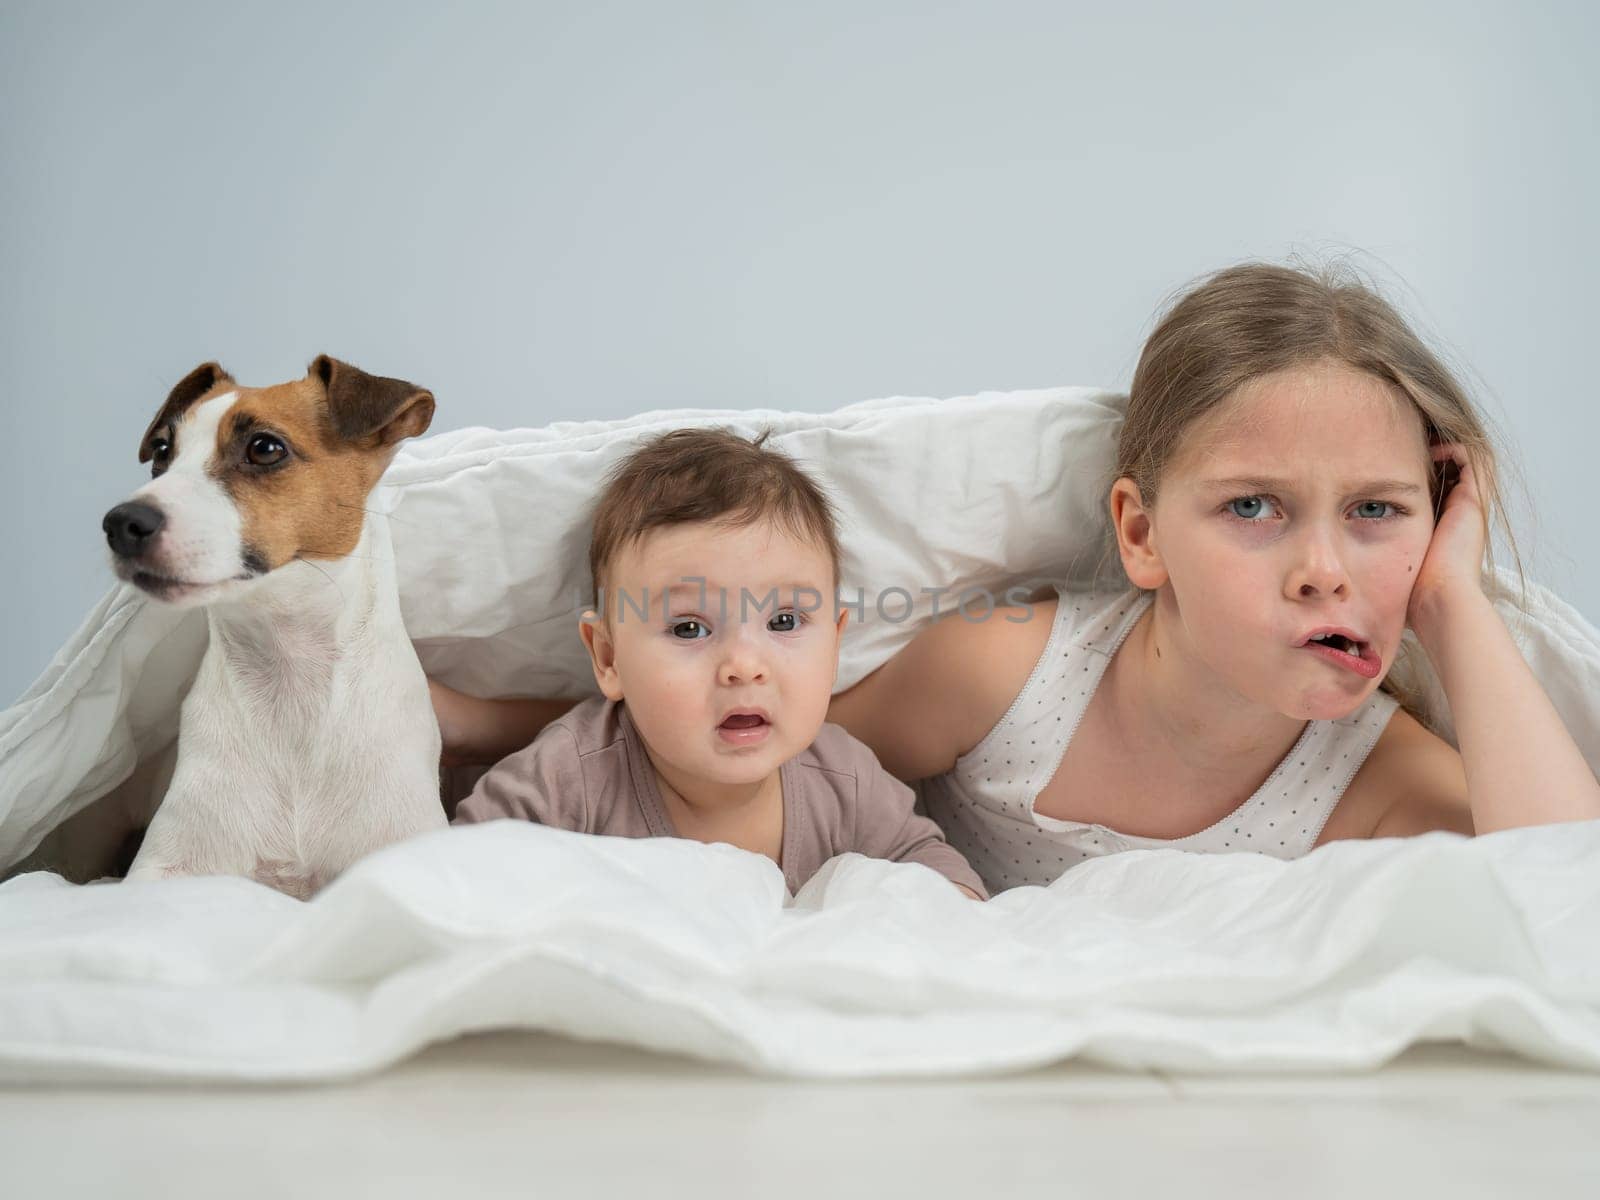 A little girl and her five-month-old brother and Jack Russell Terrier dog lie wrapped in a blanket. by mrwed54